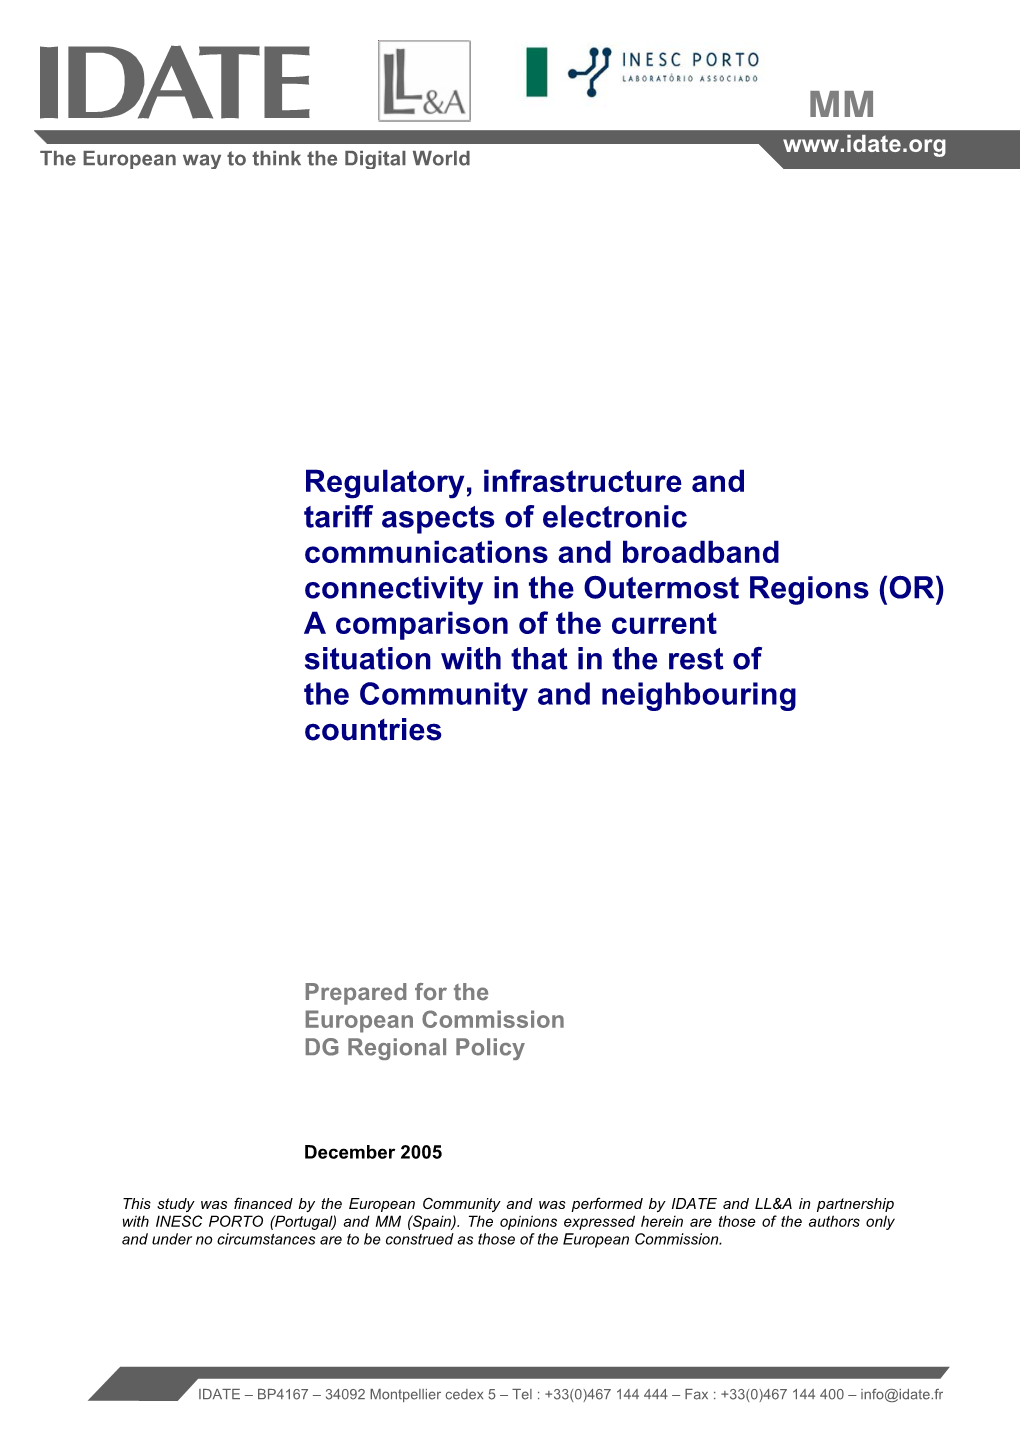 Regulatory, Infrastructure and Tariff Aspects of Electronic